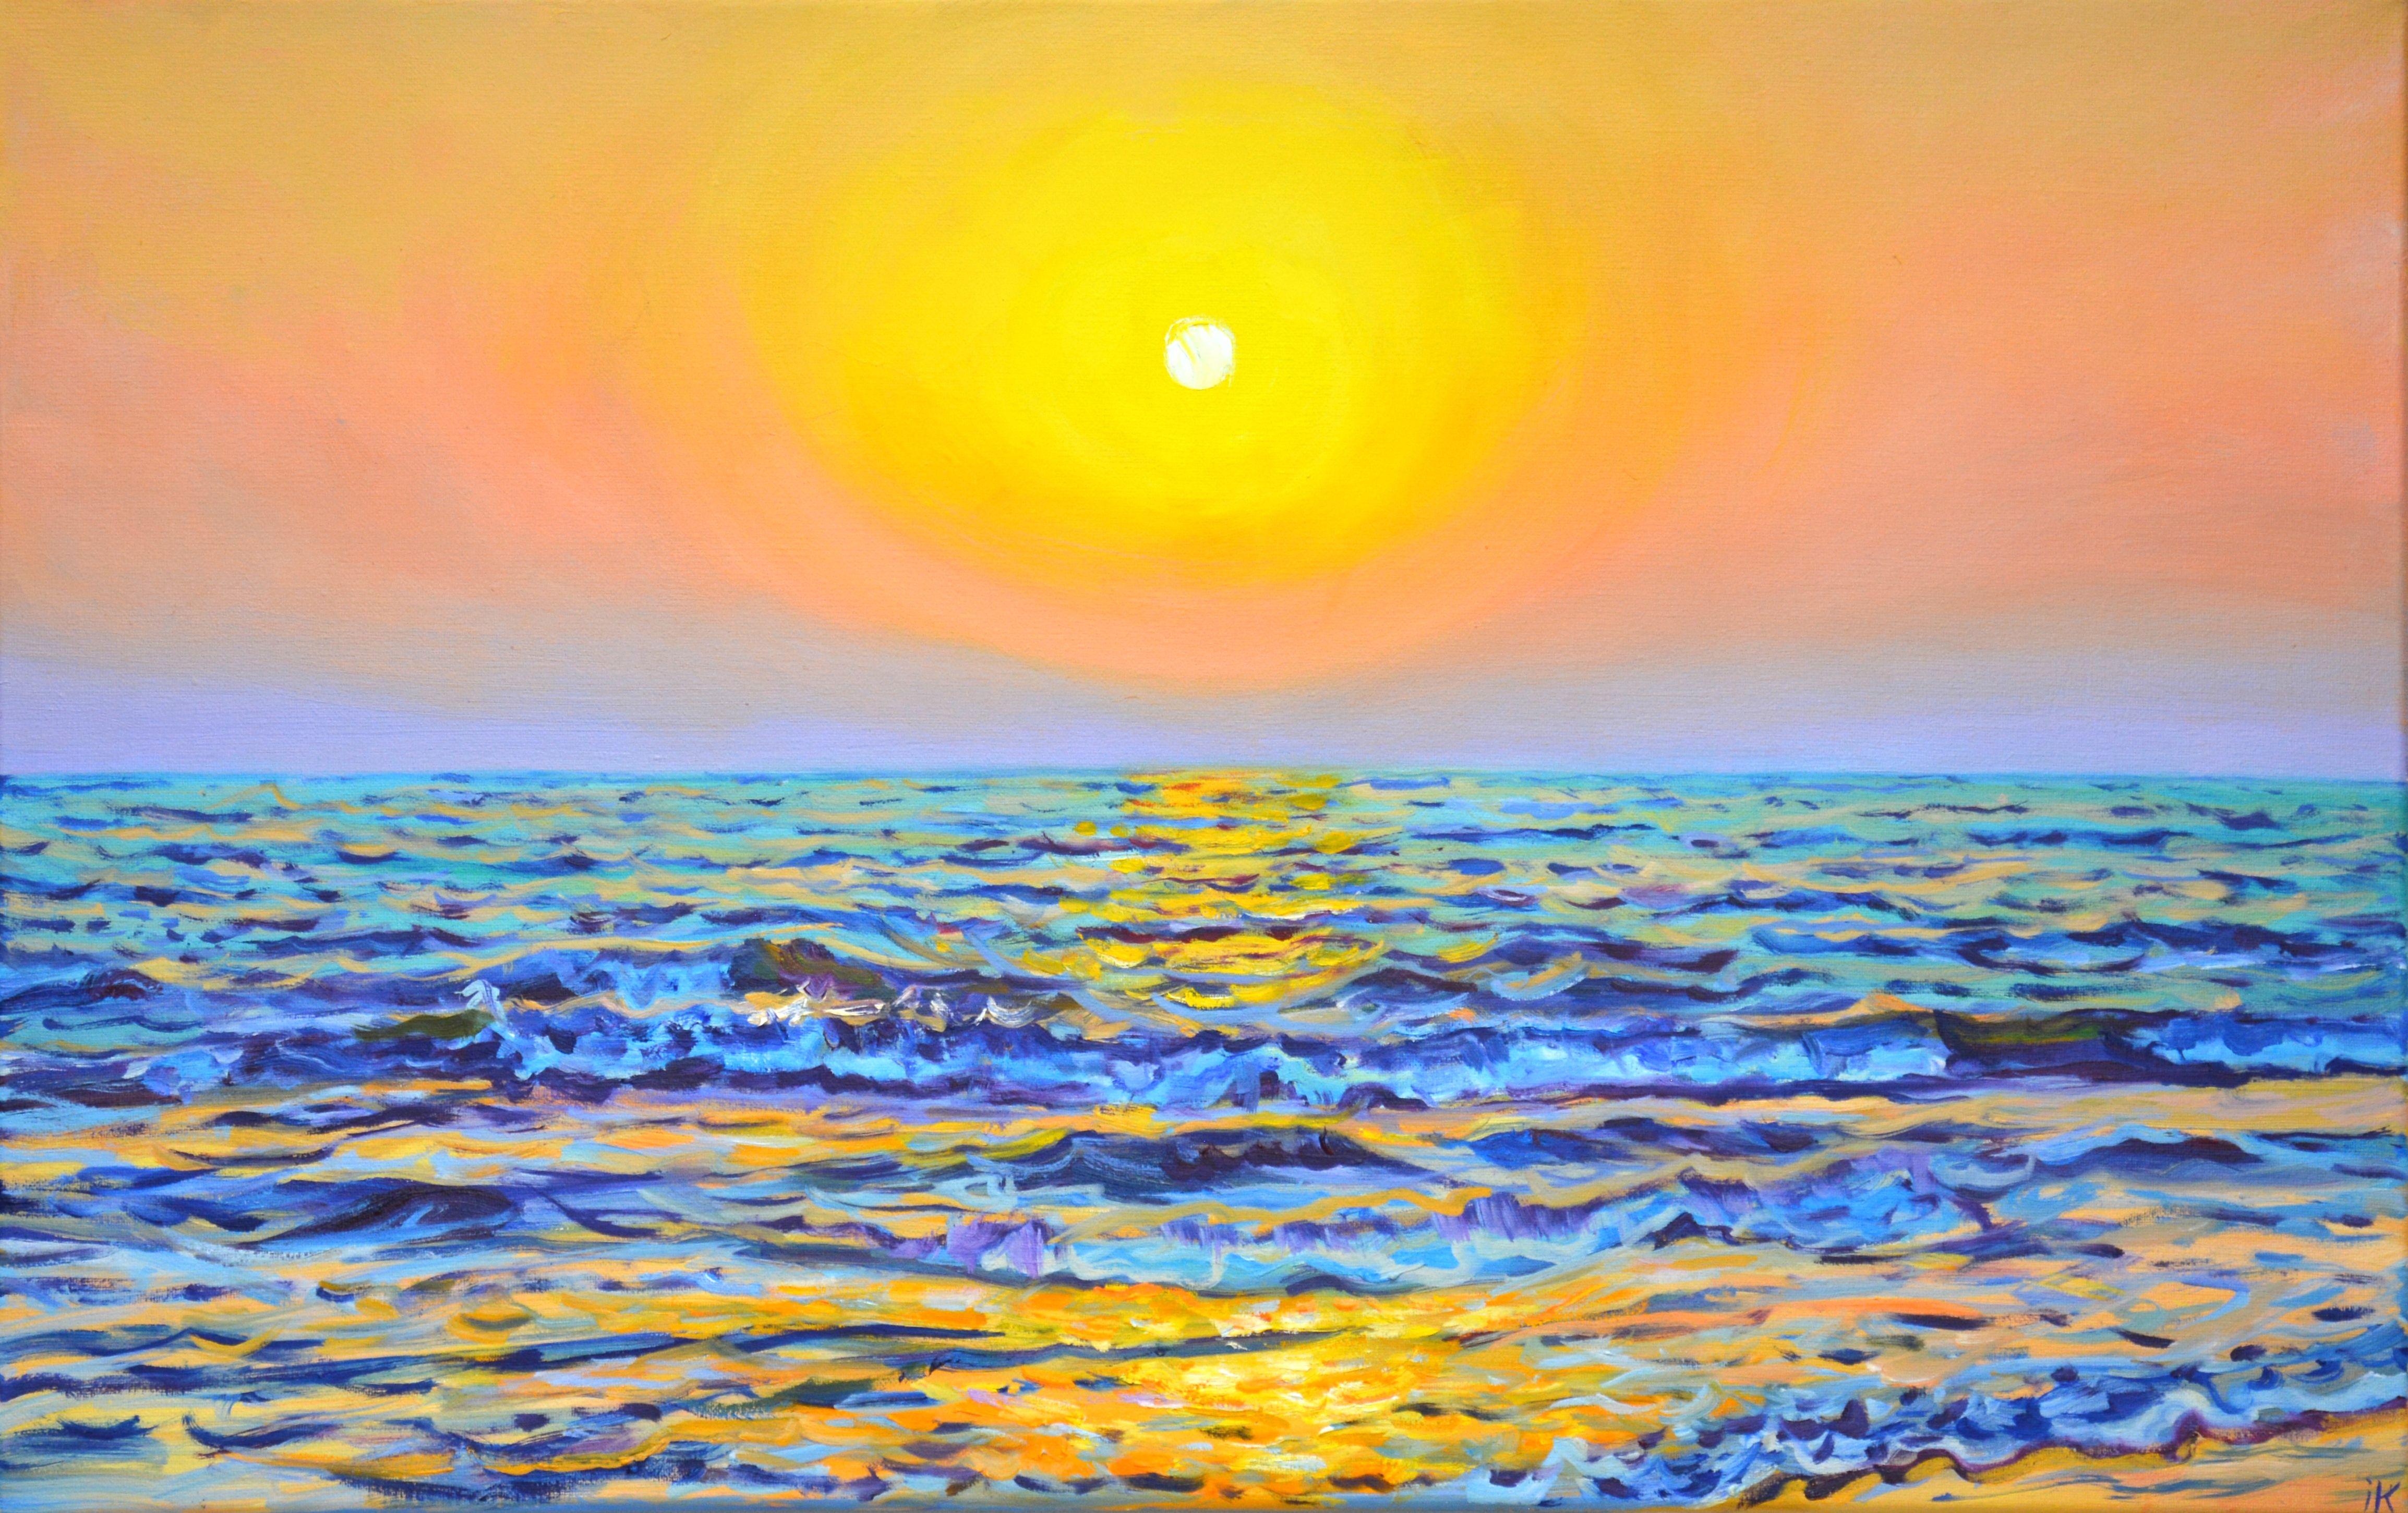 A gentle sunset over the water, the sound of coastal waves, sea foam, the reflection of the sun in the water, the sky at sunset inspired me to create this picture. Reported: positive attitude, lightness of being. Ocean sunset, picturesque sky, light